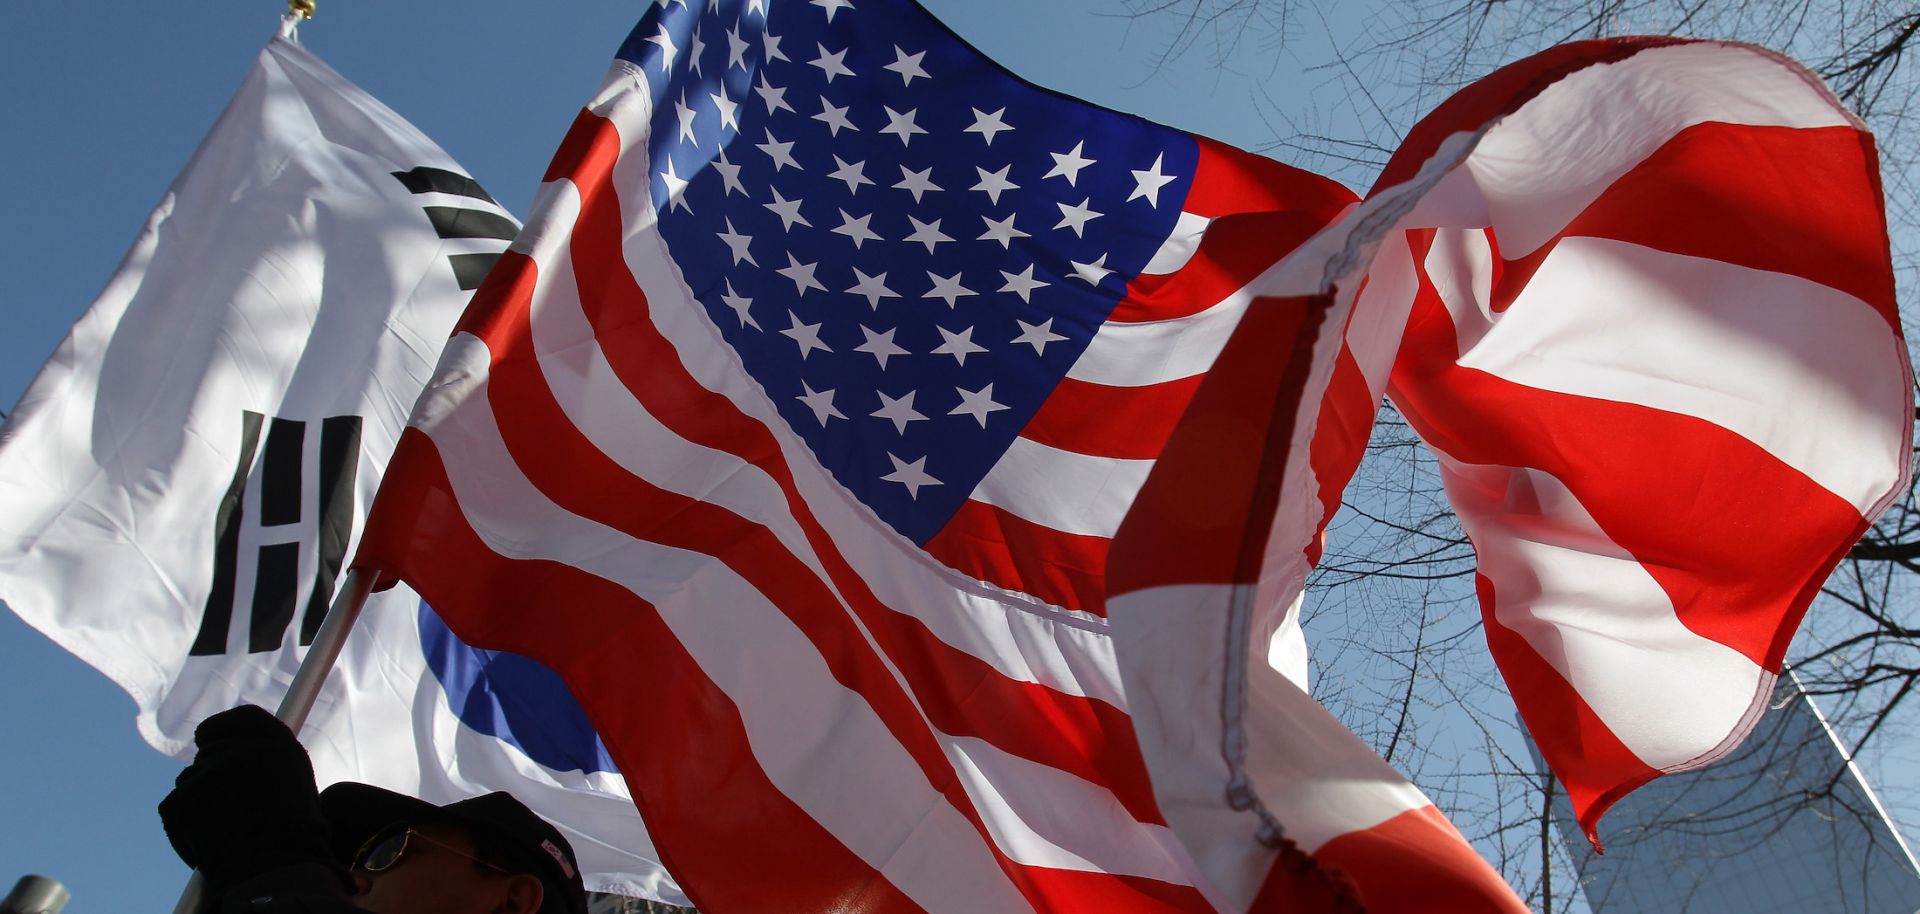 U.S. and South Korean flags are waved March 10, 2015, in Seoul, South Korea.